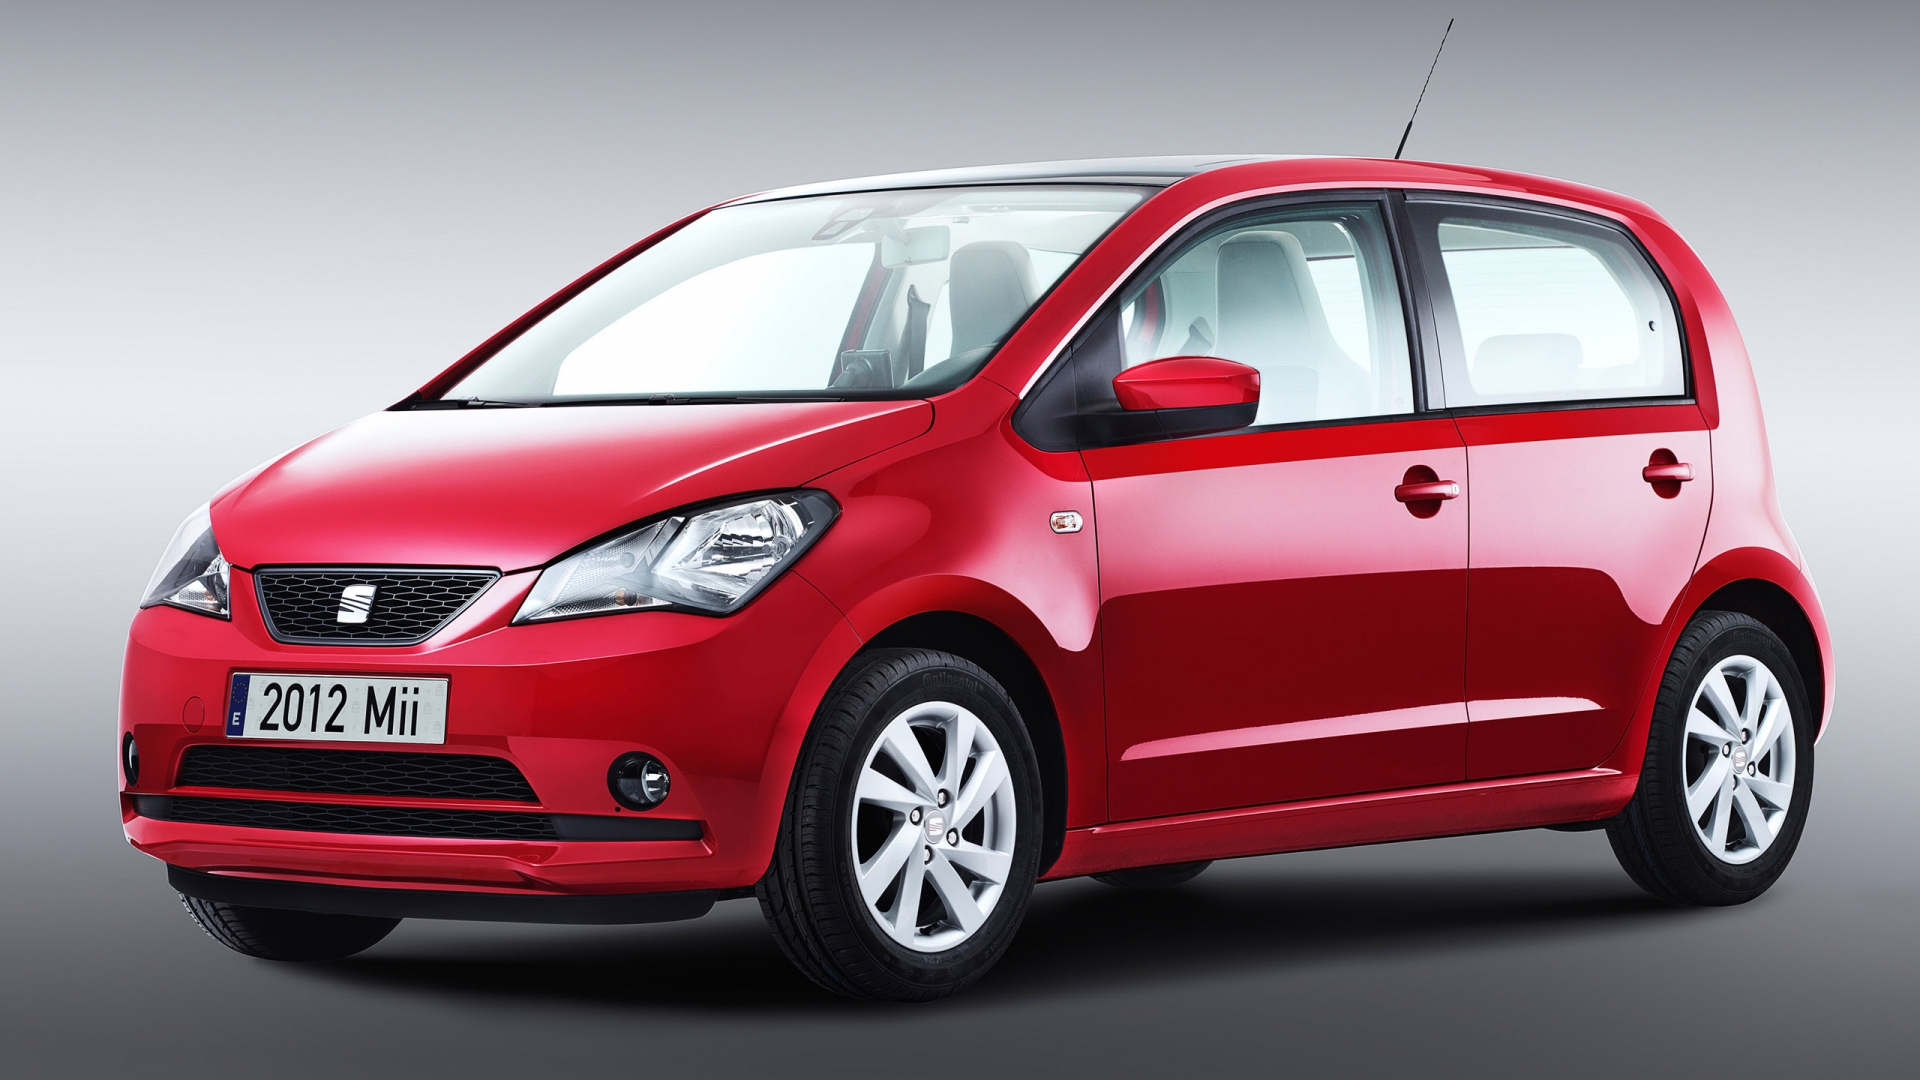 Red Seat Mii Model 2012 for 1920 x 1080 HDTV 1080p resolution